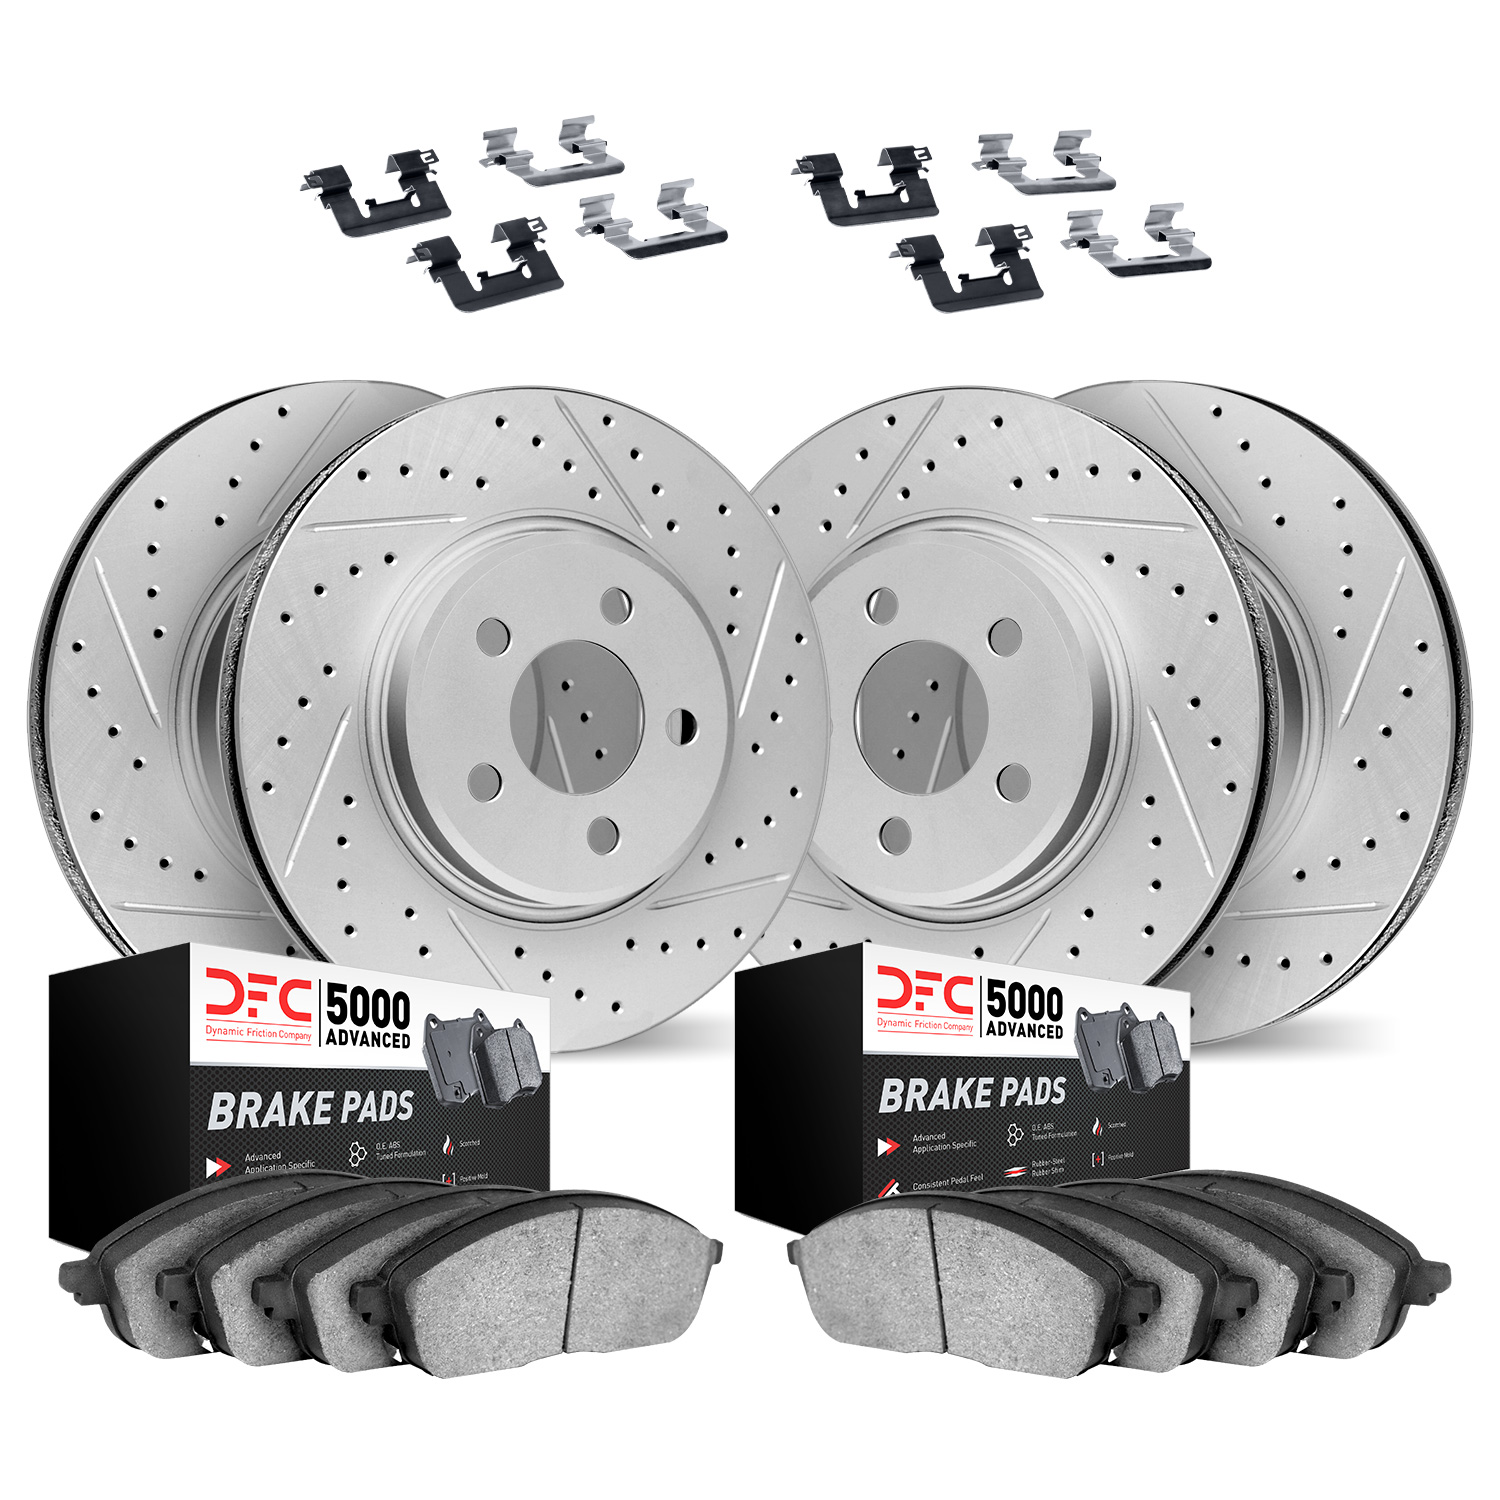 2514-42072 Geoperformance Drilled/Slotted Rotors w/5000 Advanced Brake Pads Kit & Hardware, Fits Select Mopar, Position: Front a